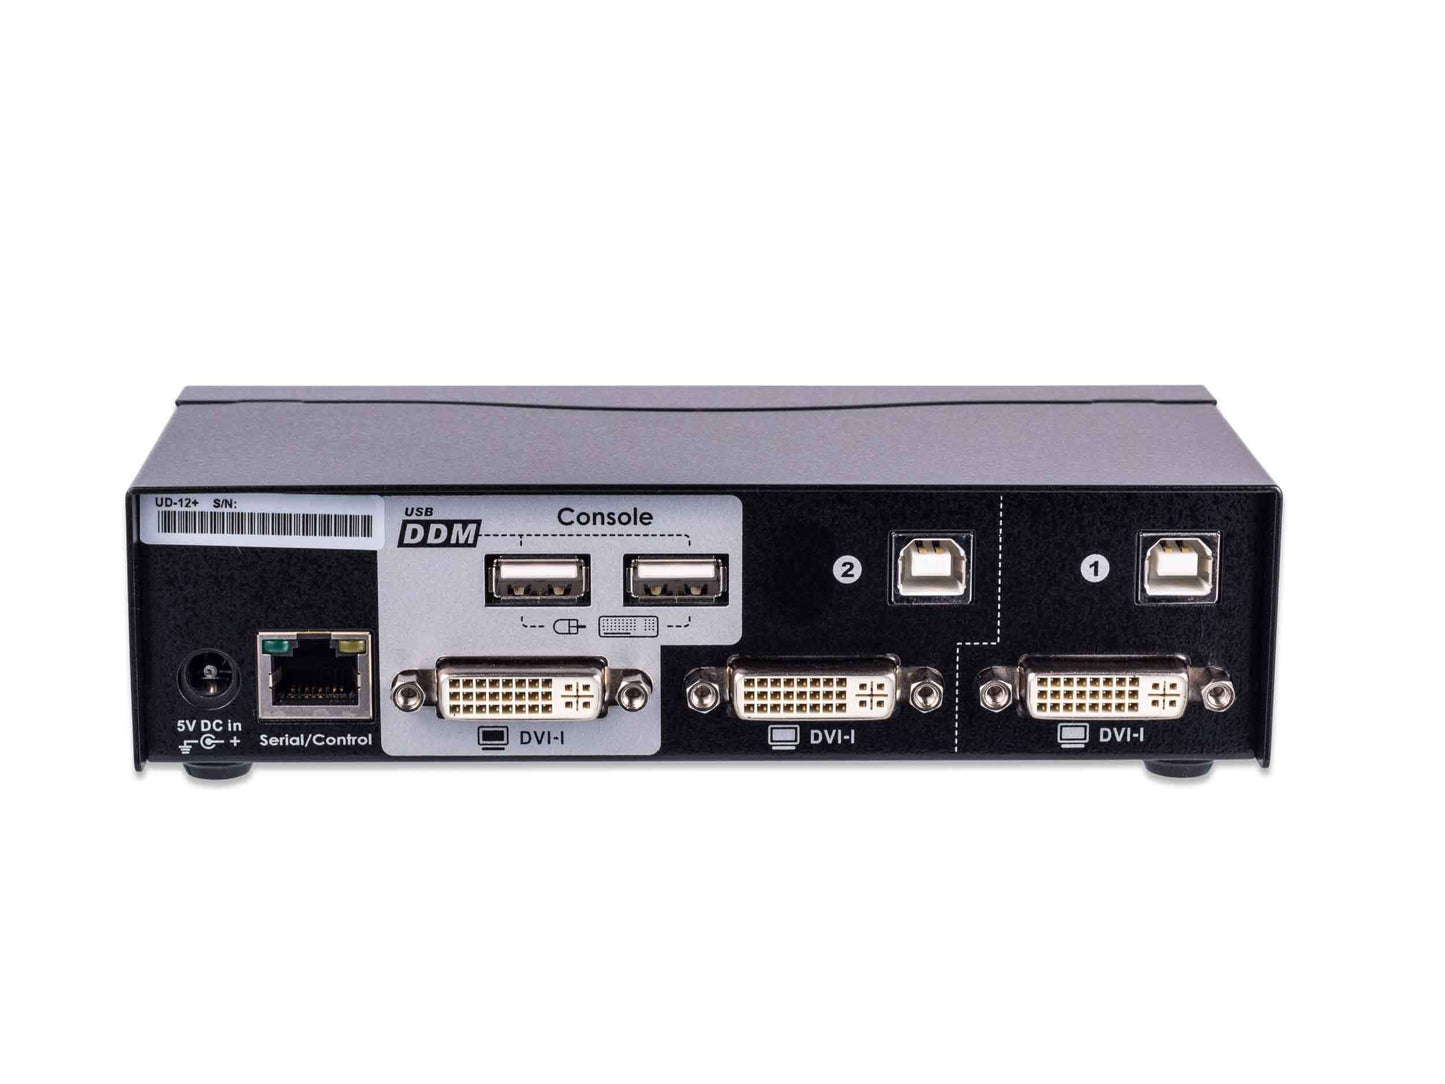 UD-12+ DVI-D KVM switch for One Monitor and Two Computers